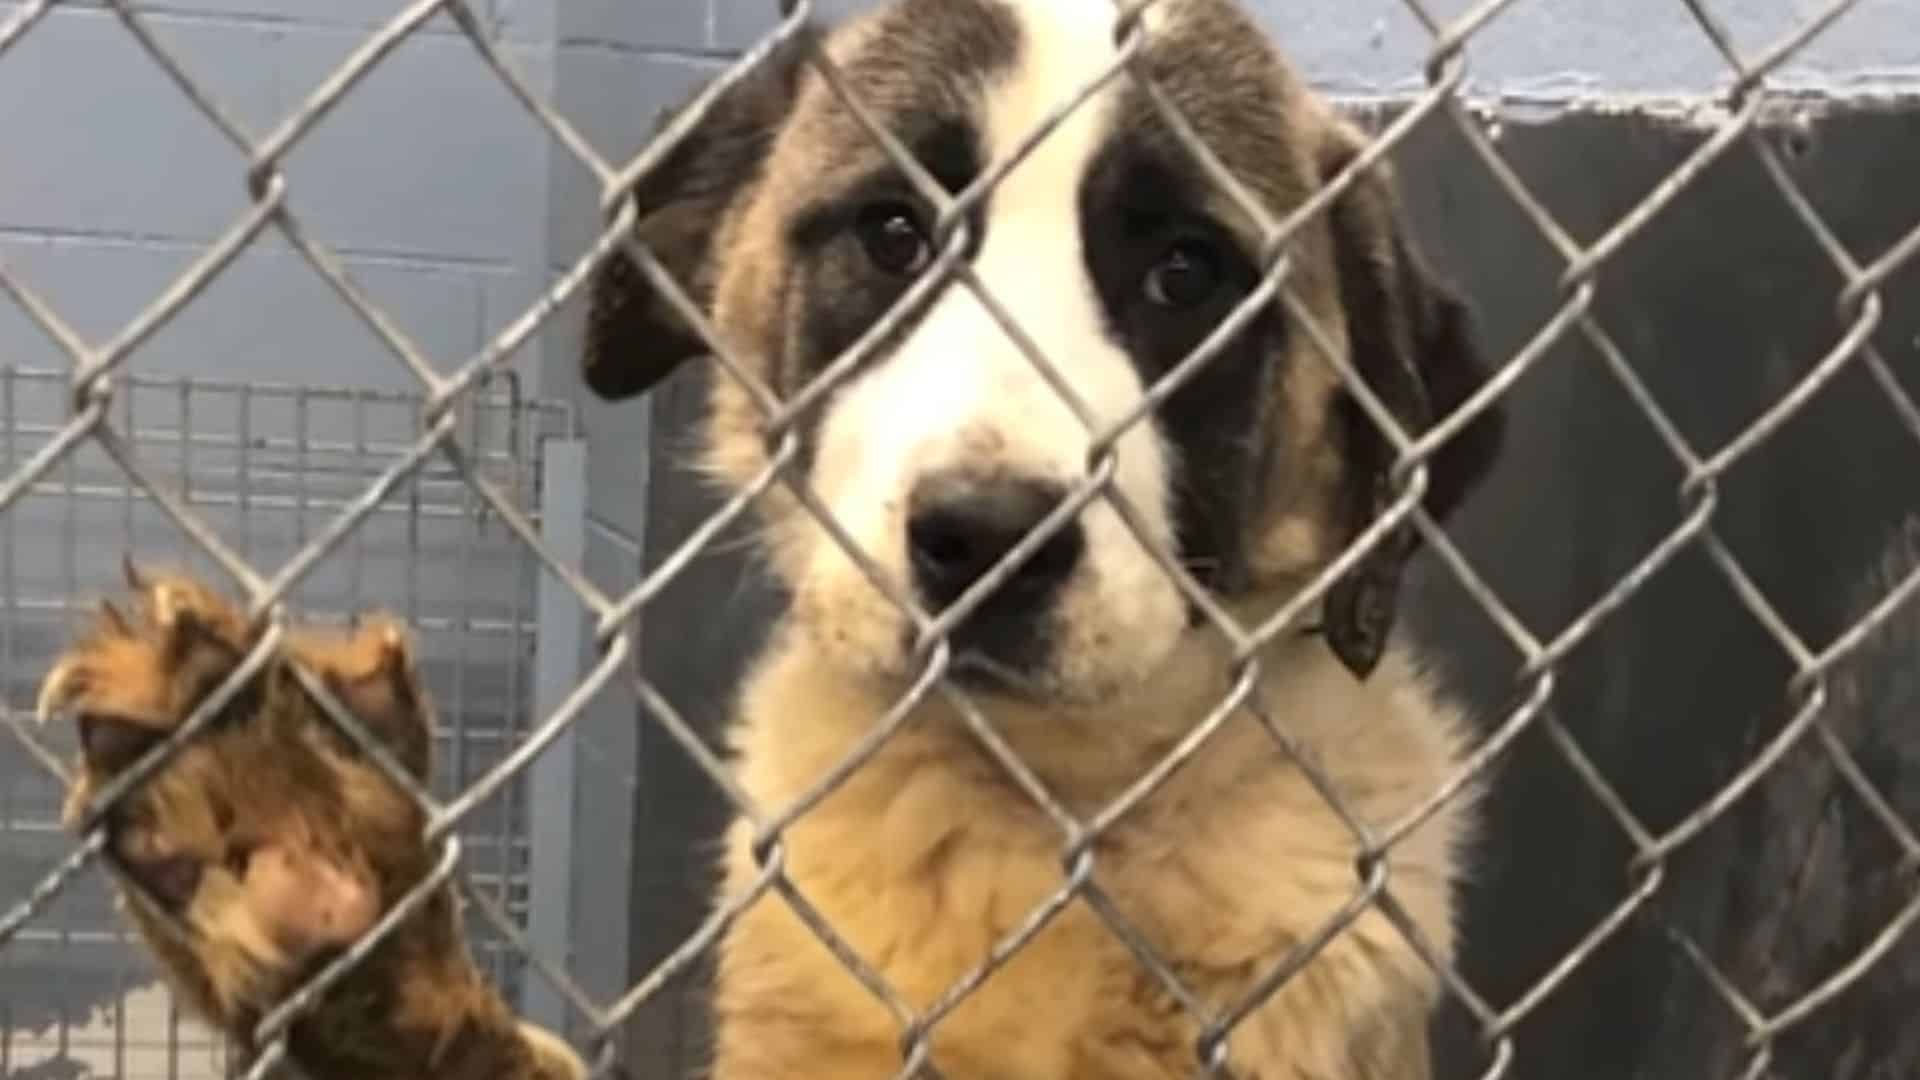 Shelter Dog Who Lived In A Tiny Crate For 6 Years Freaks Out Over Cheeseburger